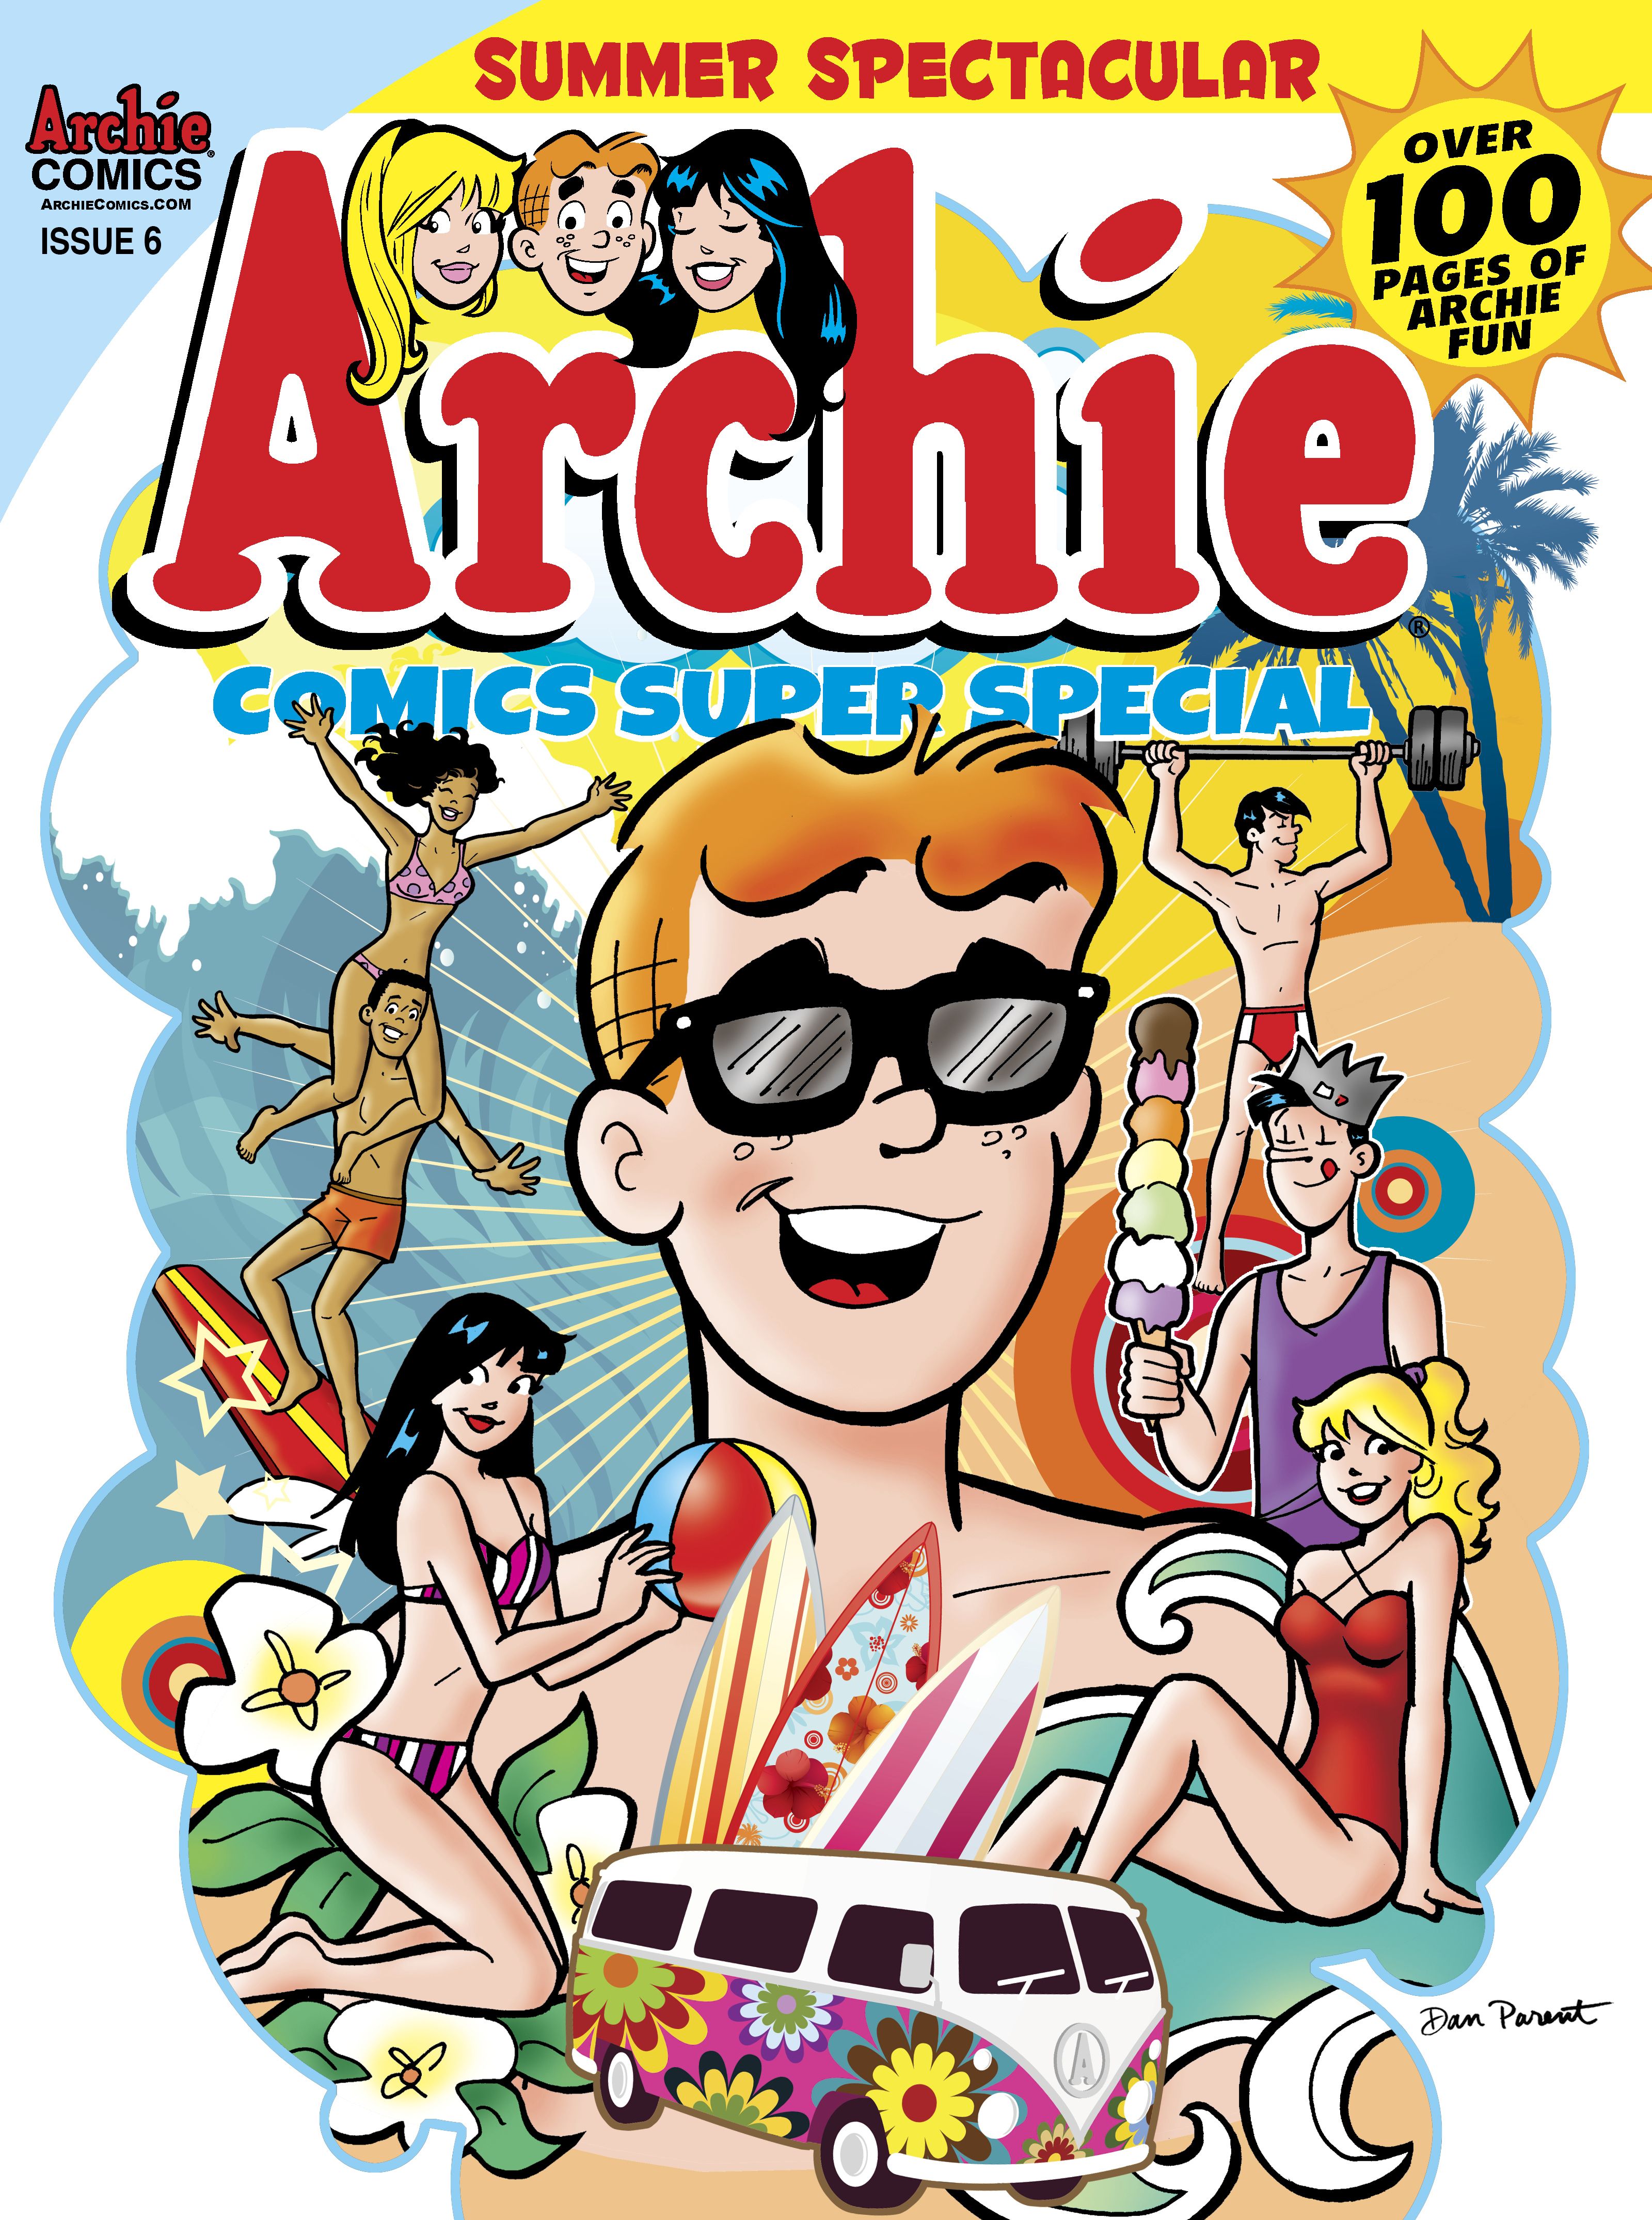 Archie Comics August 2014 Covers and Solicitations